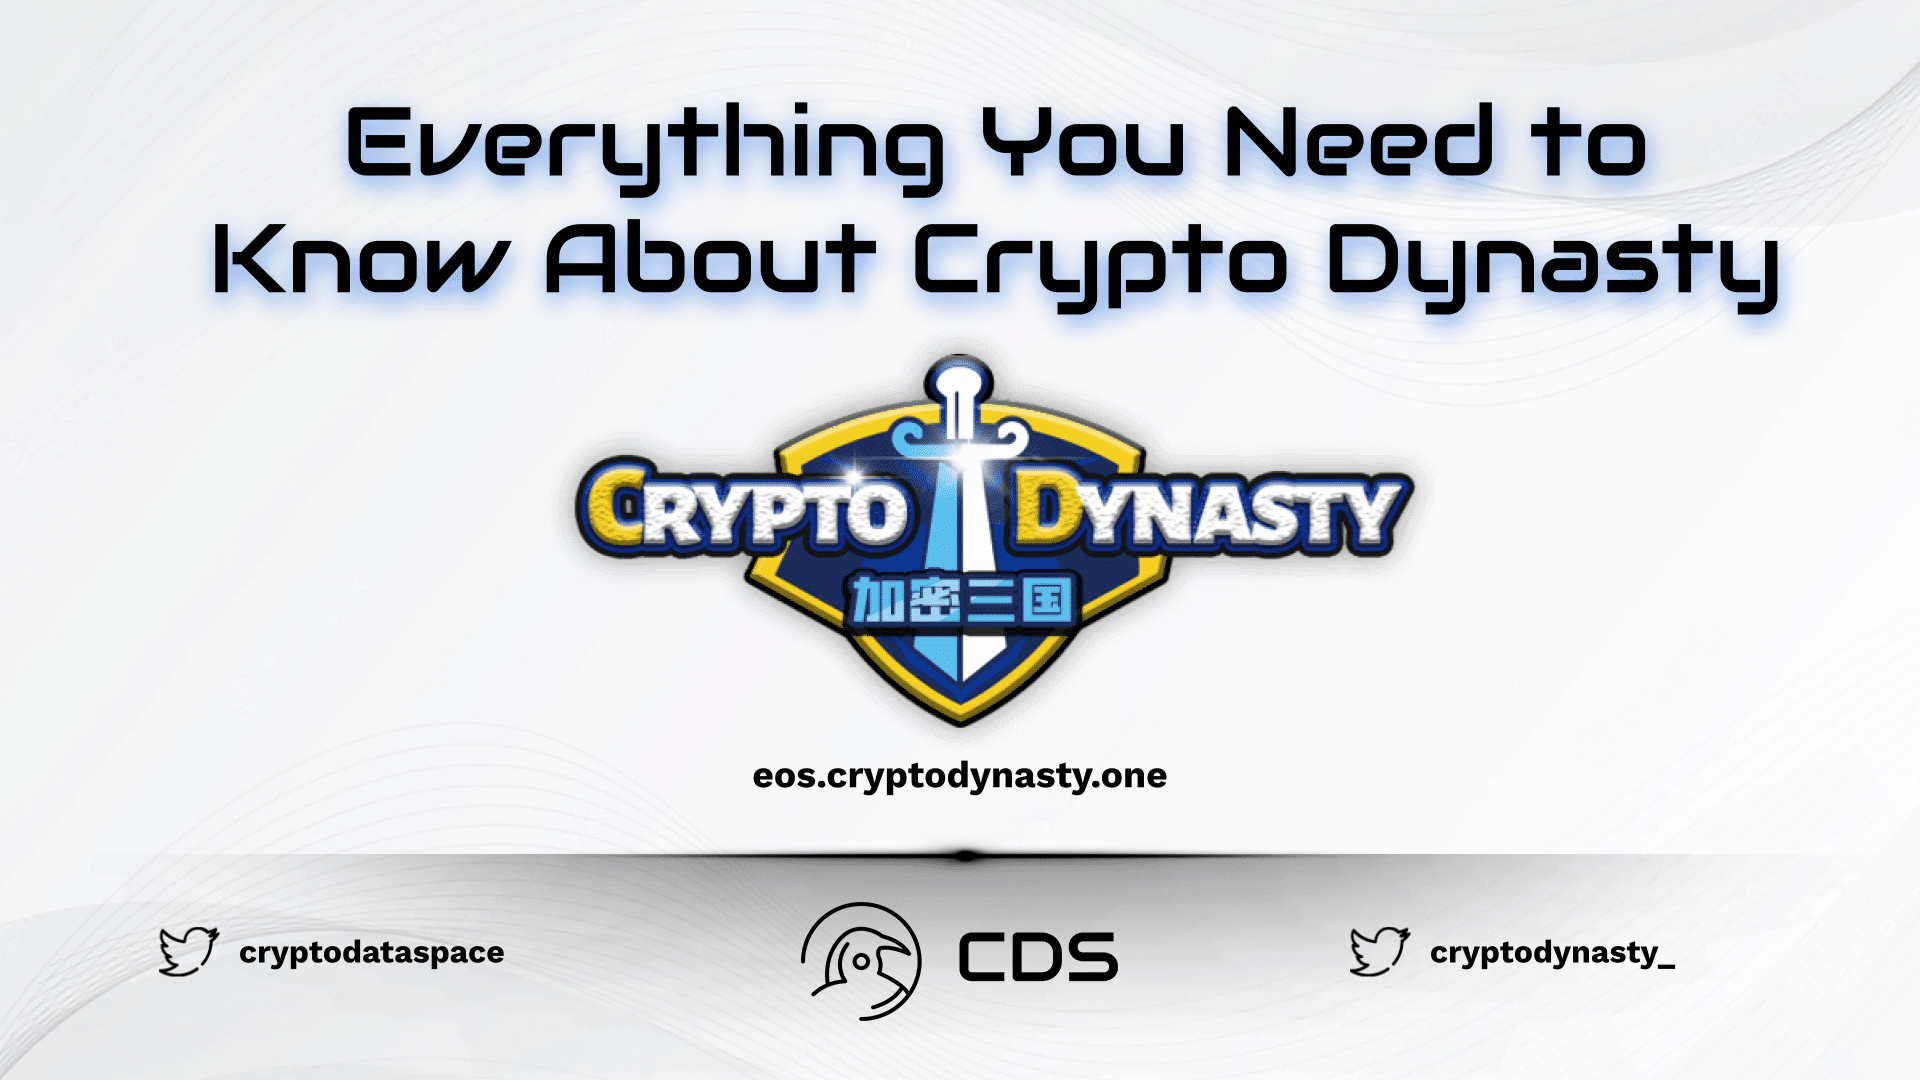 Everything You Need to Know About Crypto Dynasty